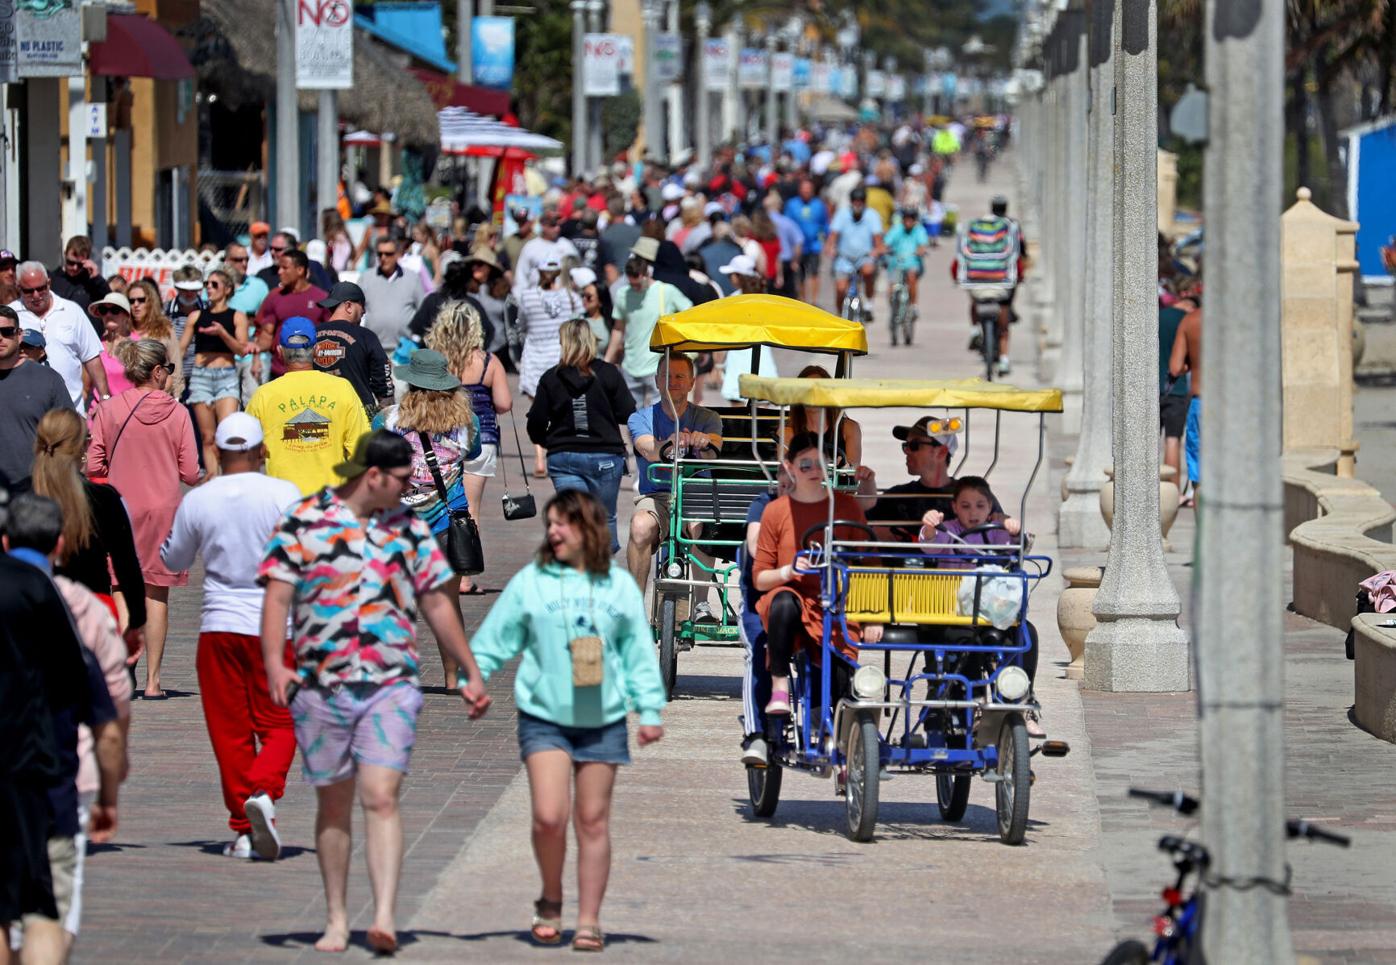 Florida had more summer tourists than before the pandemic